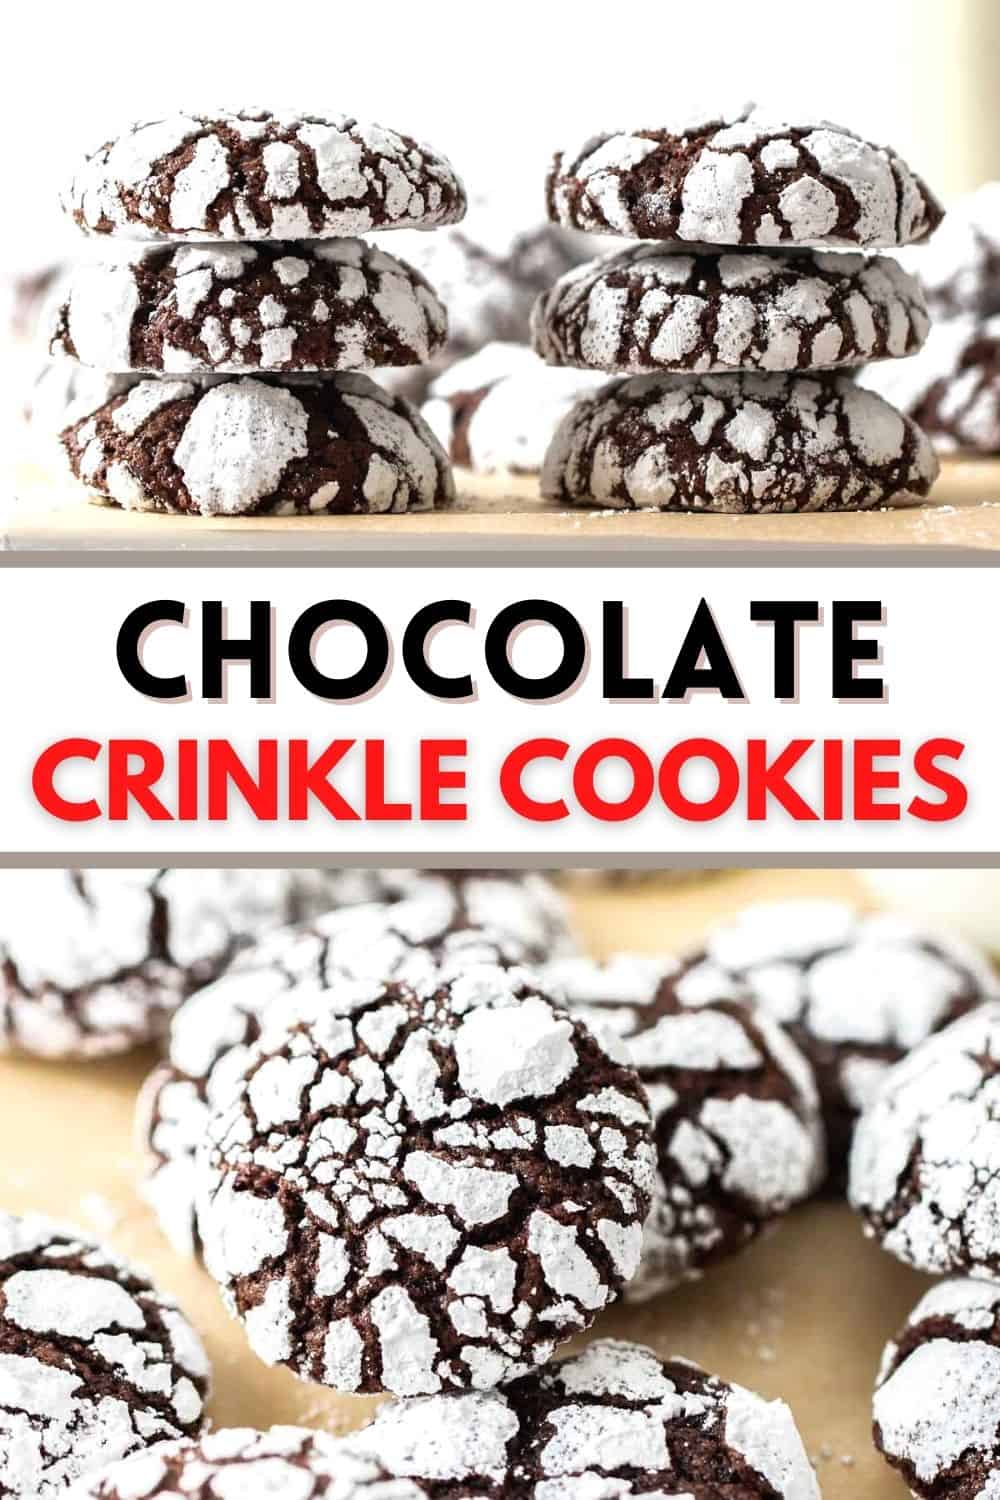 Chocolate crinkle cookies are fudgy like brownies and SO very easy. Coated with powdered sugar, these give the perfect crinkle! The best chocolate Christmas cookies!